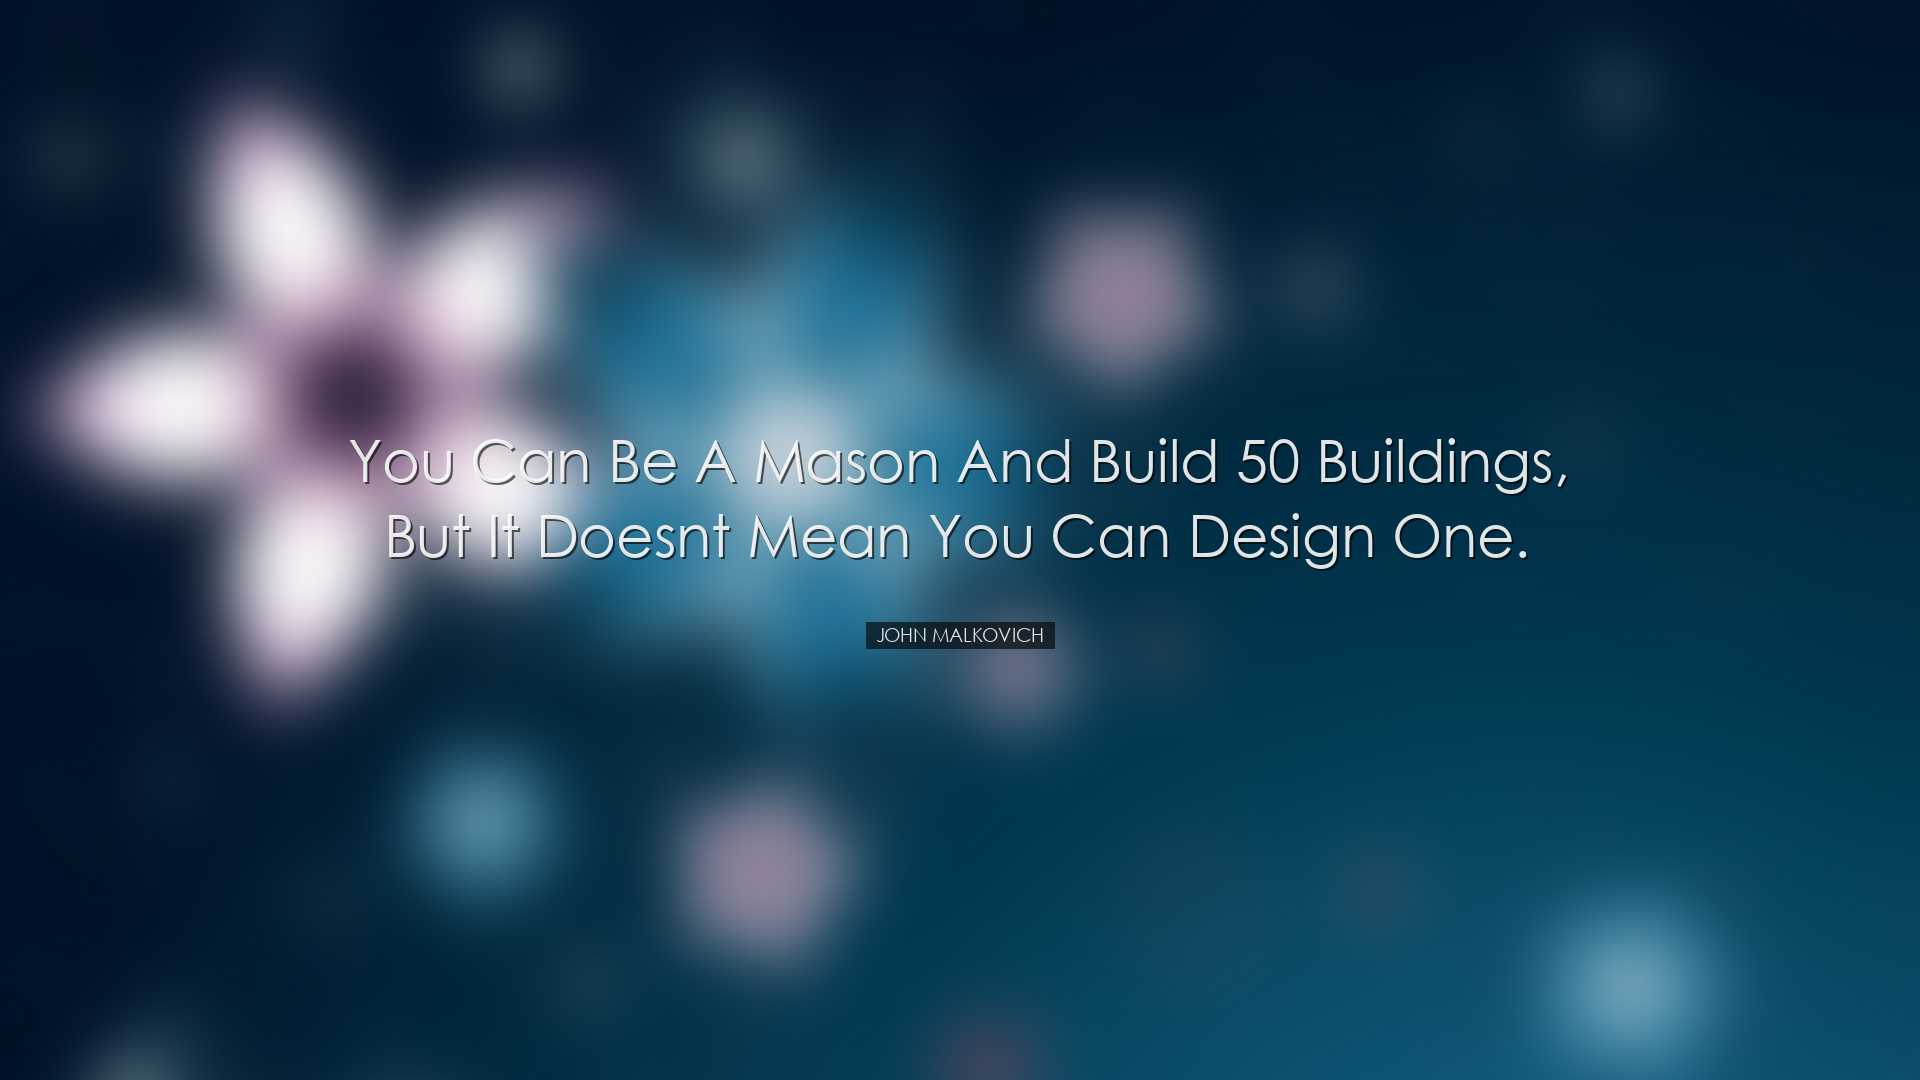 You can be a mason and build 50 buildings, but it doesnt mean you